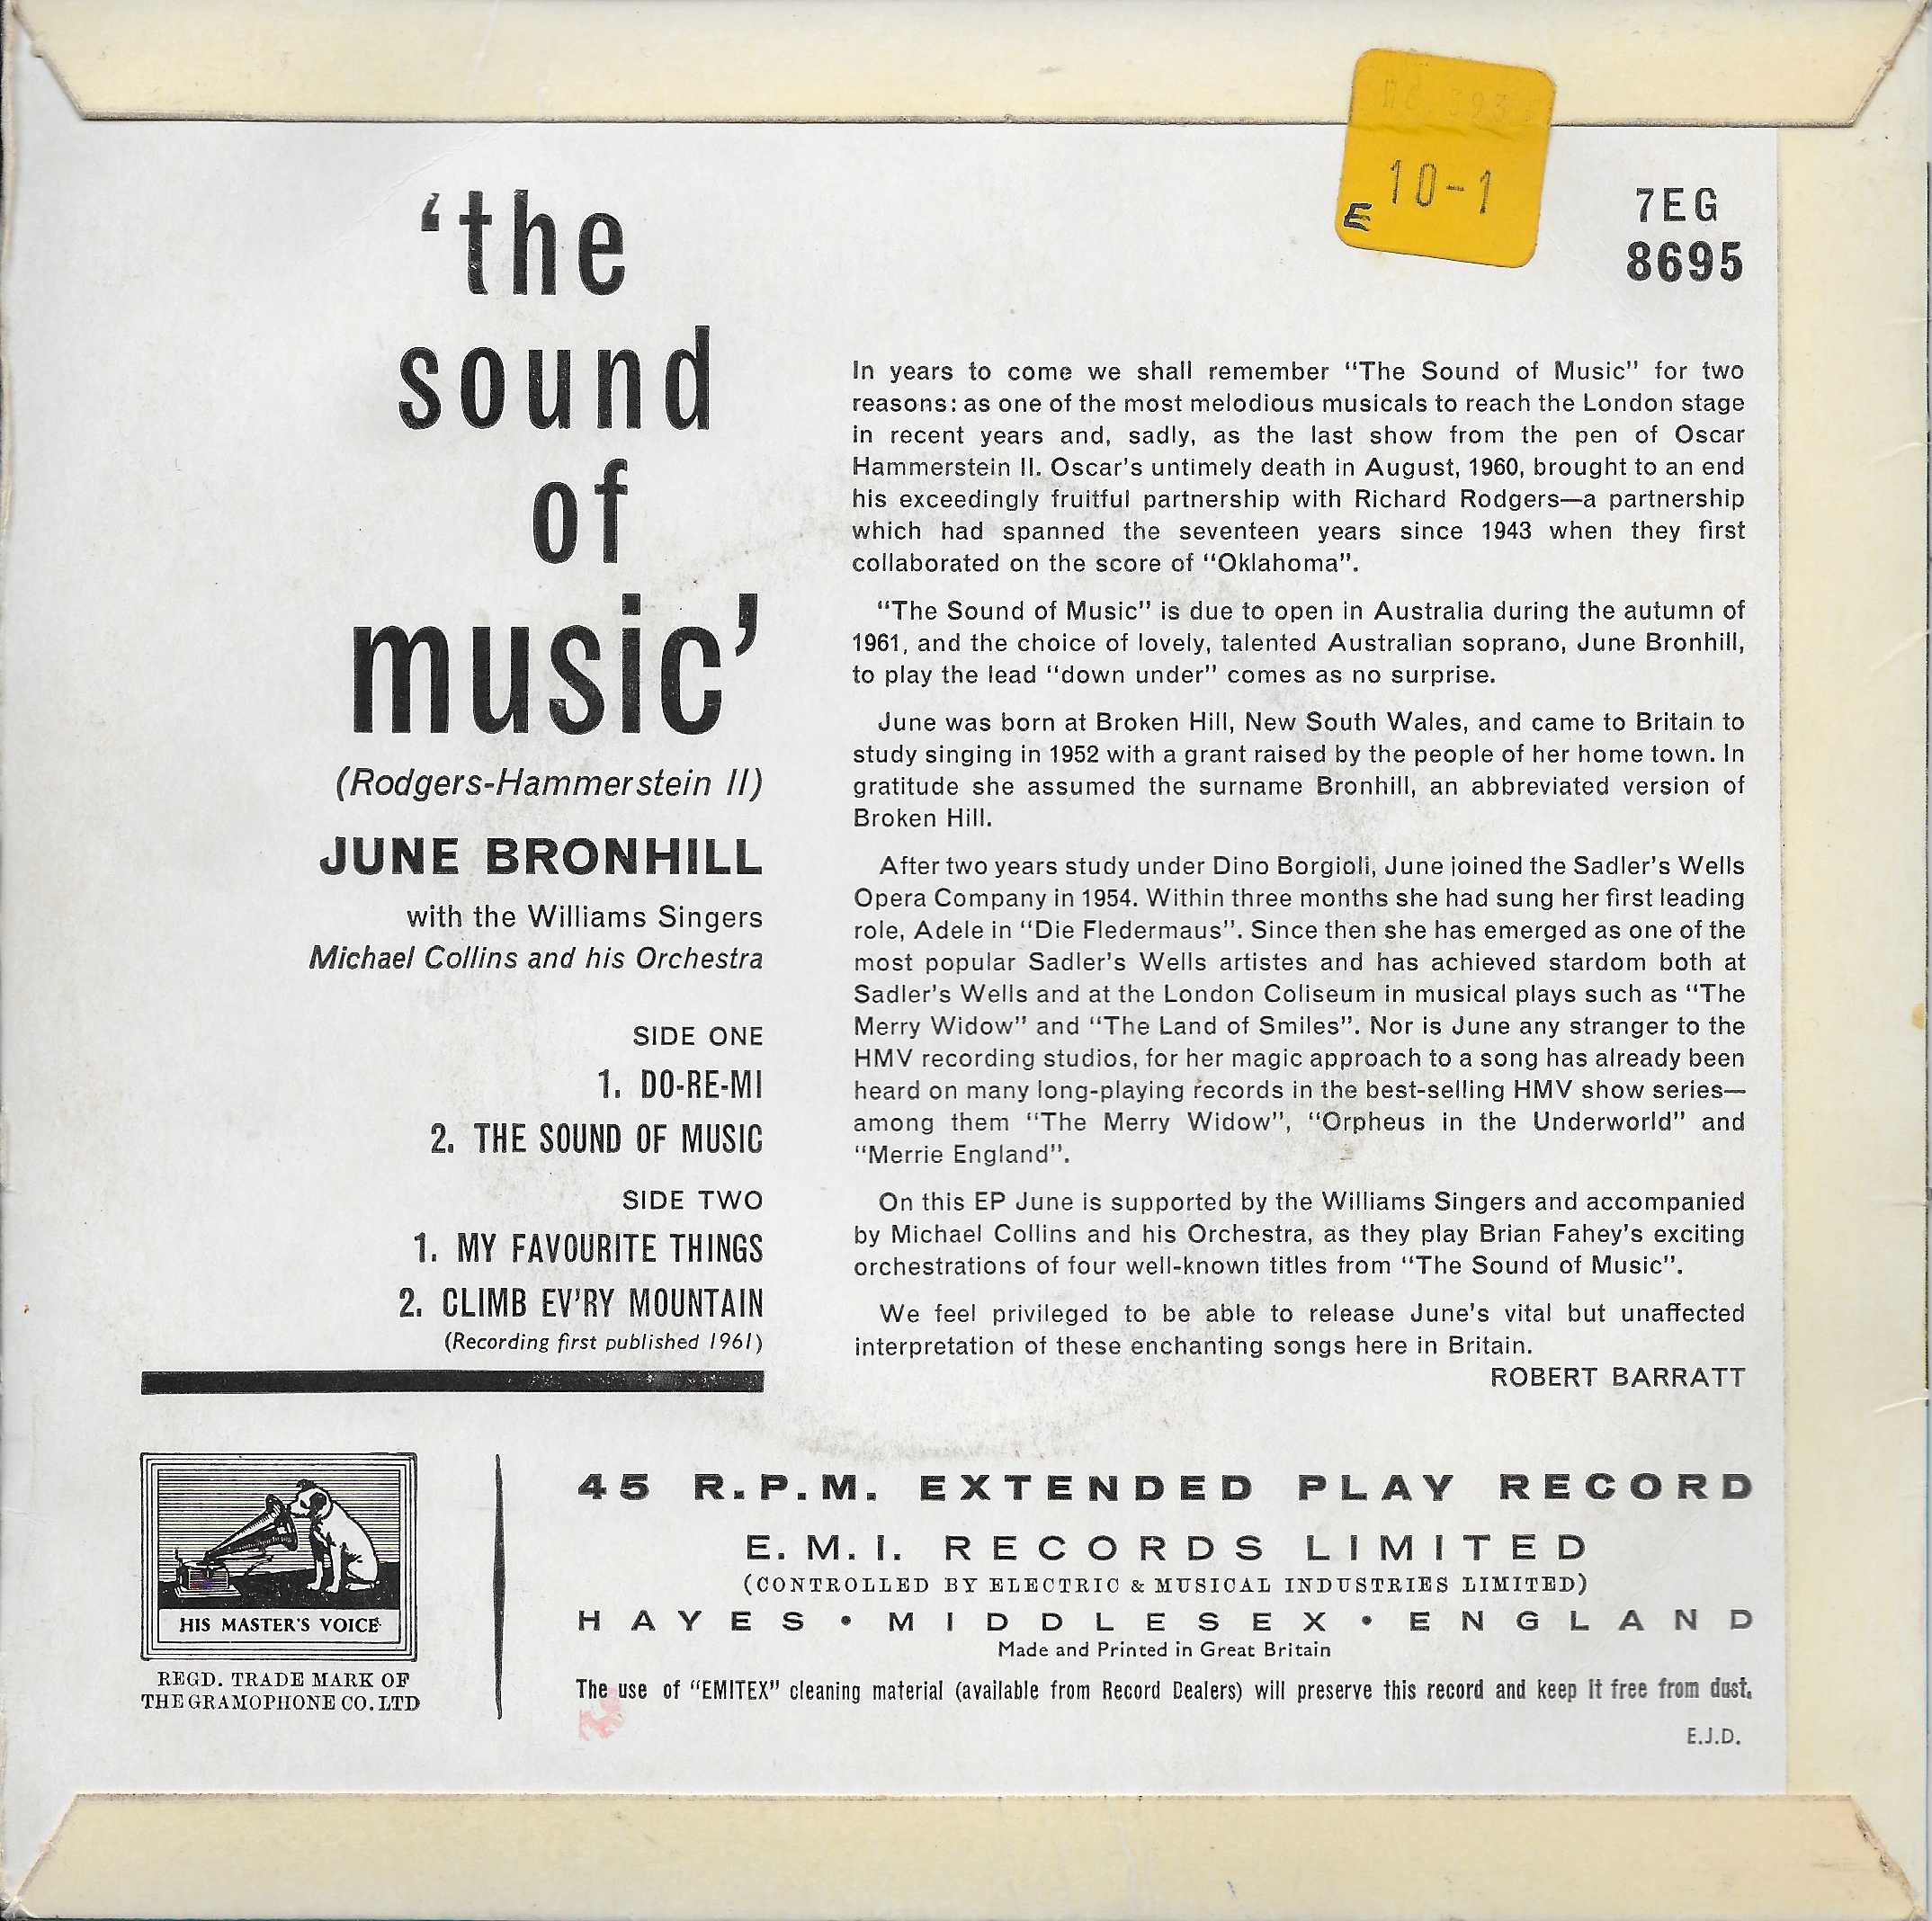 Picture of 7EG 8695 The sound of music by artist Rogers / Hammerstein II / June Bronhill with the Williams Singers and Michael Collins and his orchestra from ITV, Channel 4 and Channel 5 library